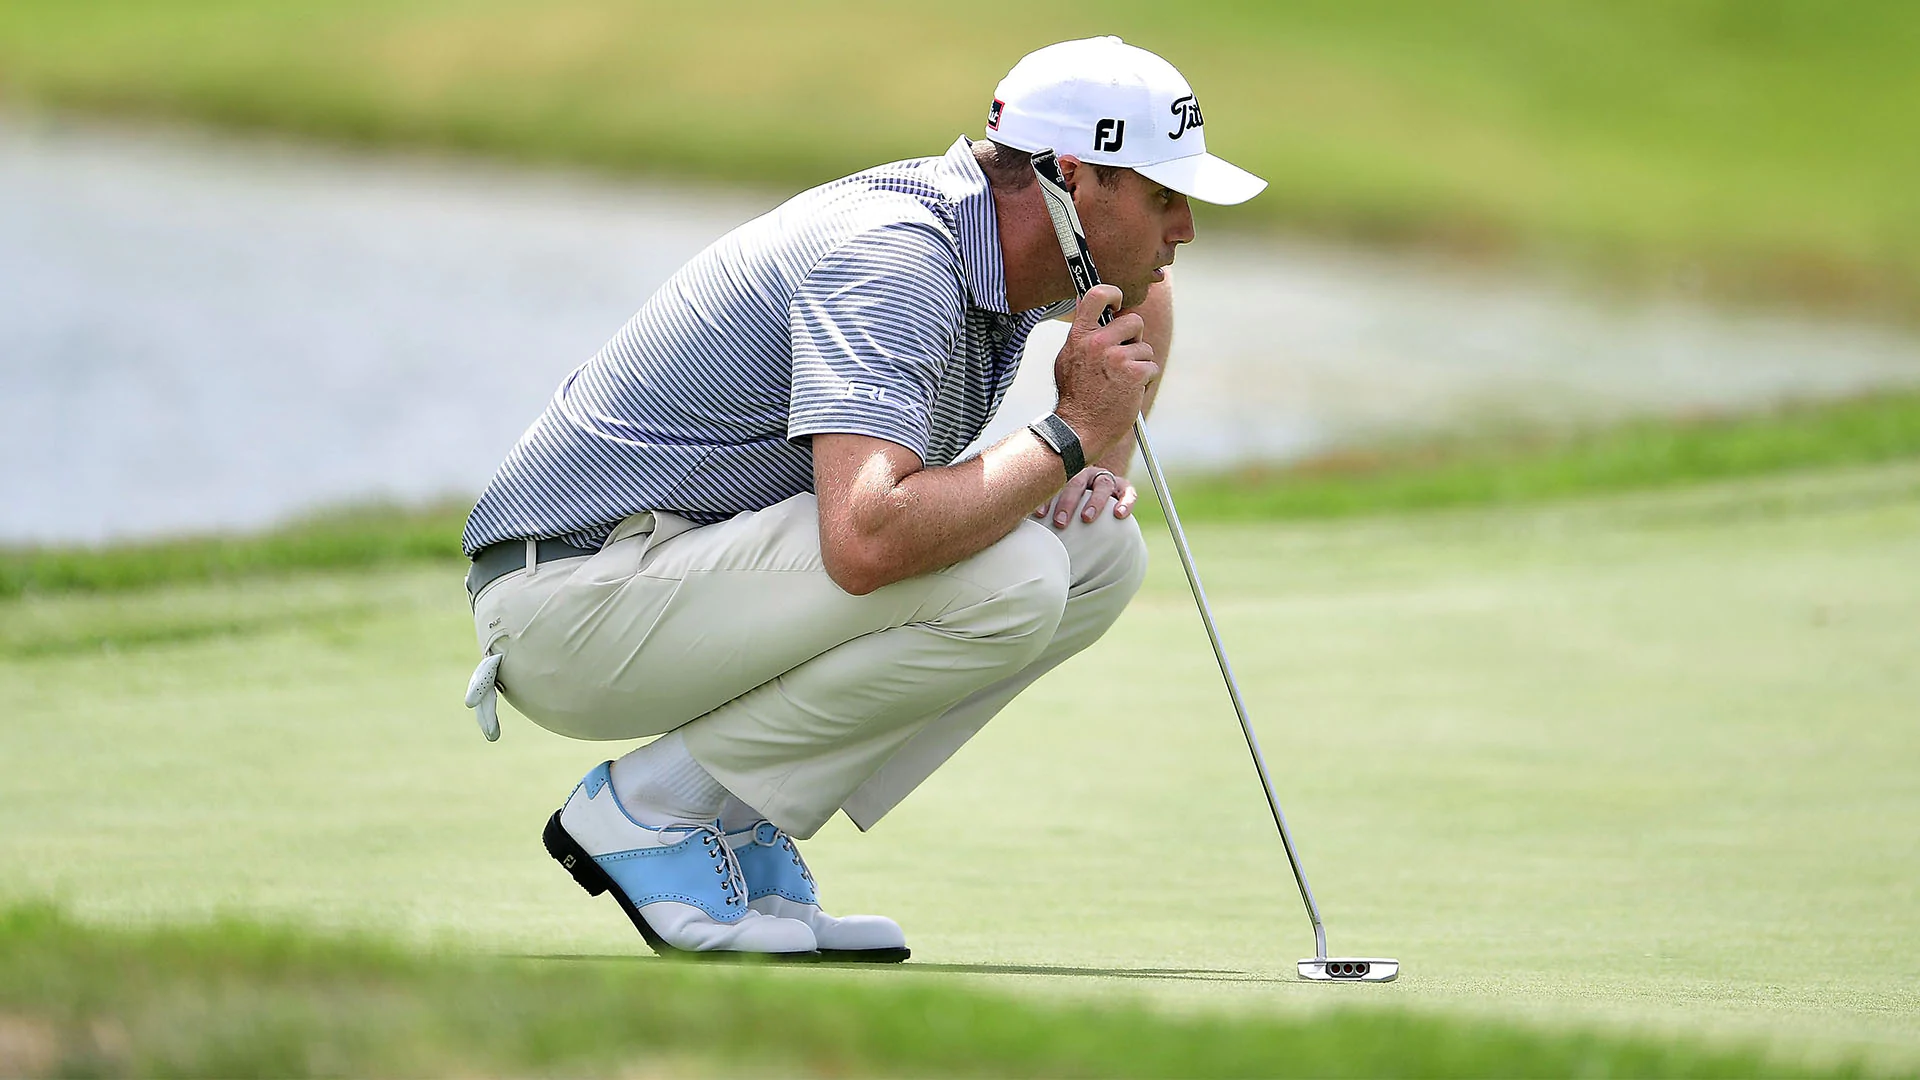 Nick Watney eager to shift focus from COVID-19 back to on-course play